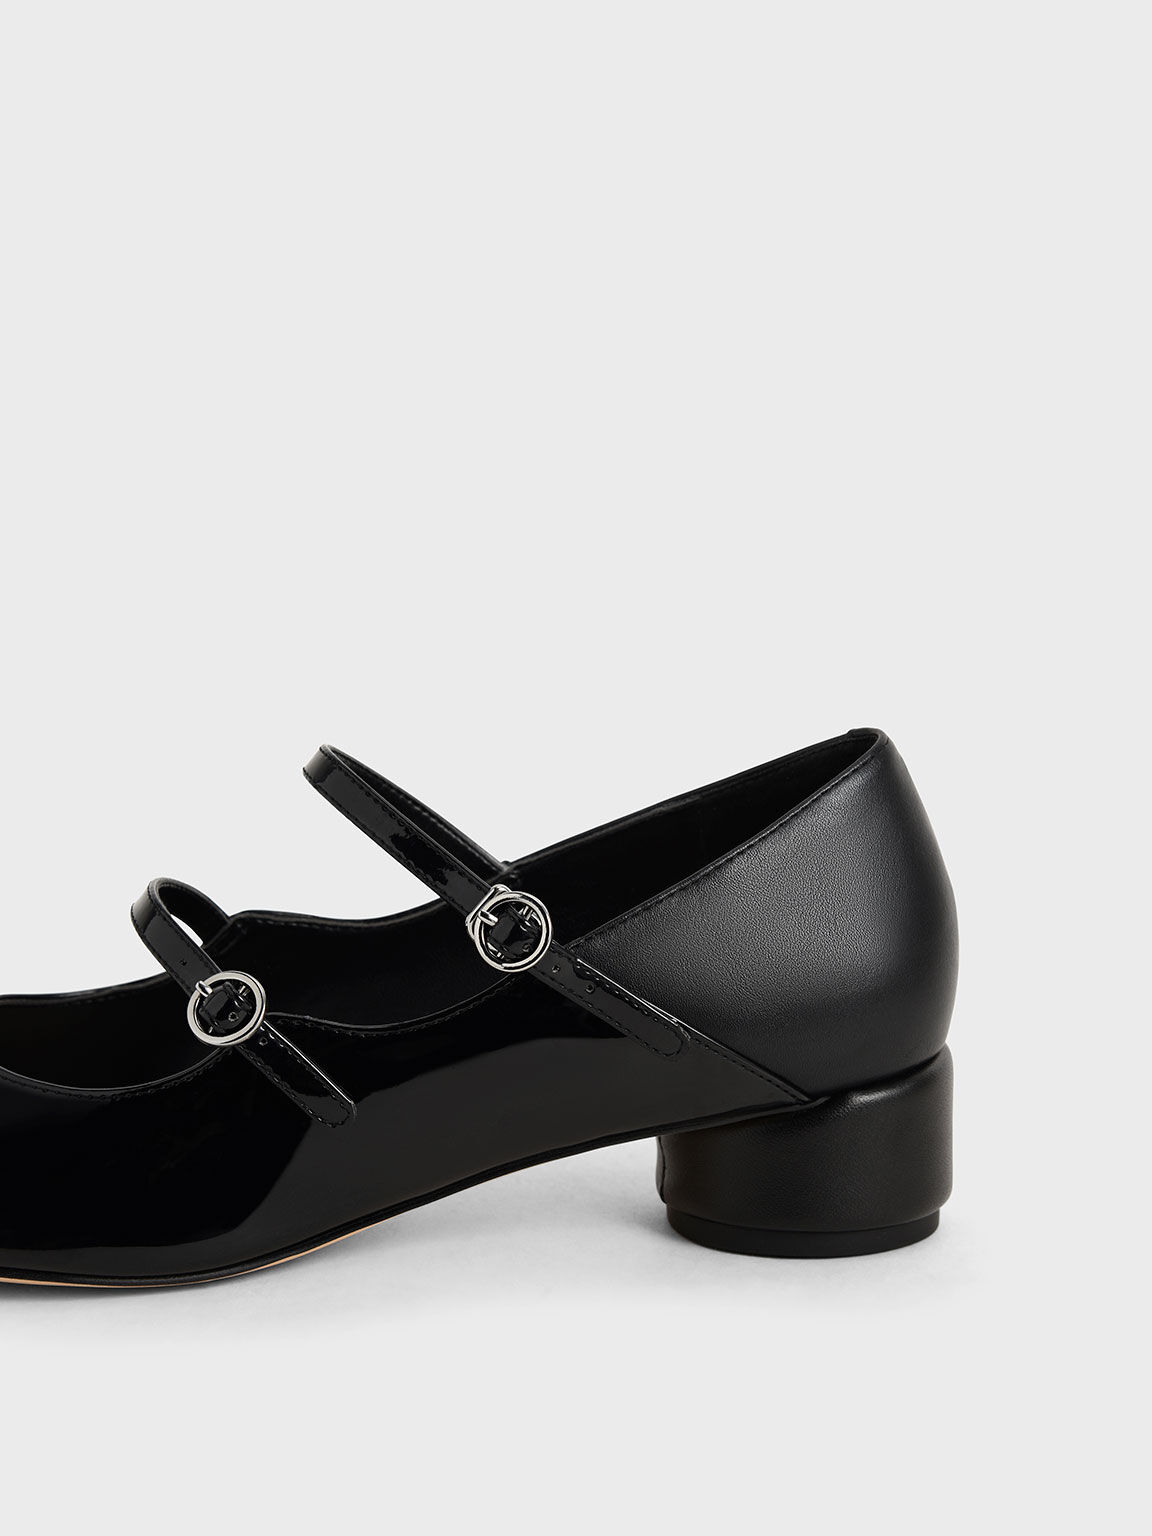 Patent Double-Strap Mary Janes, Black, hi-res